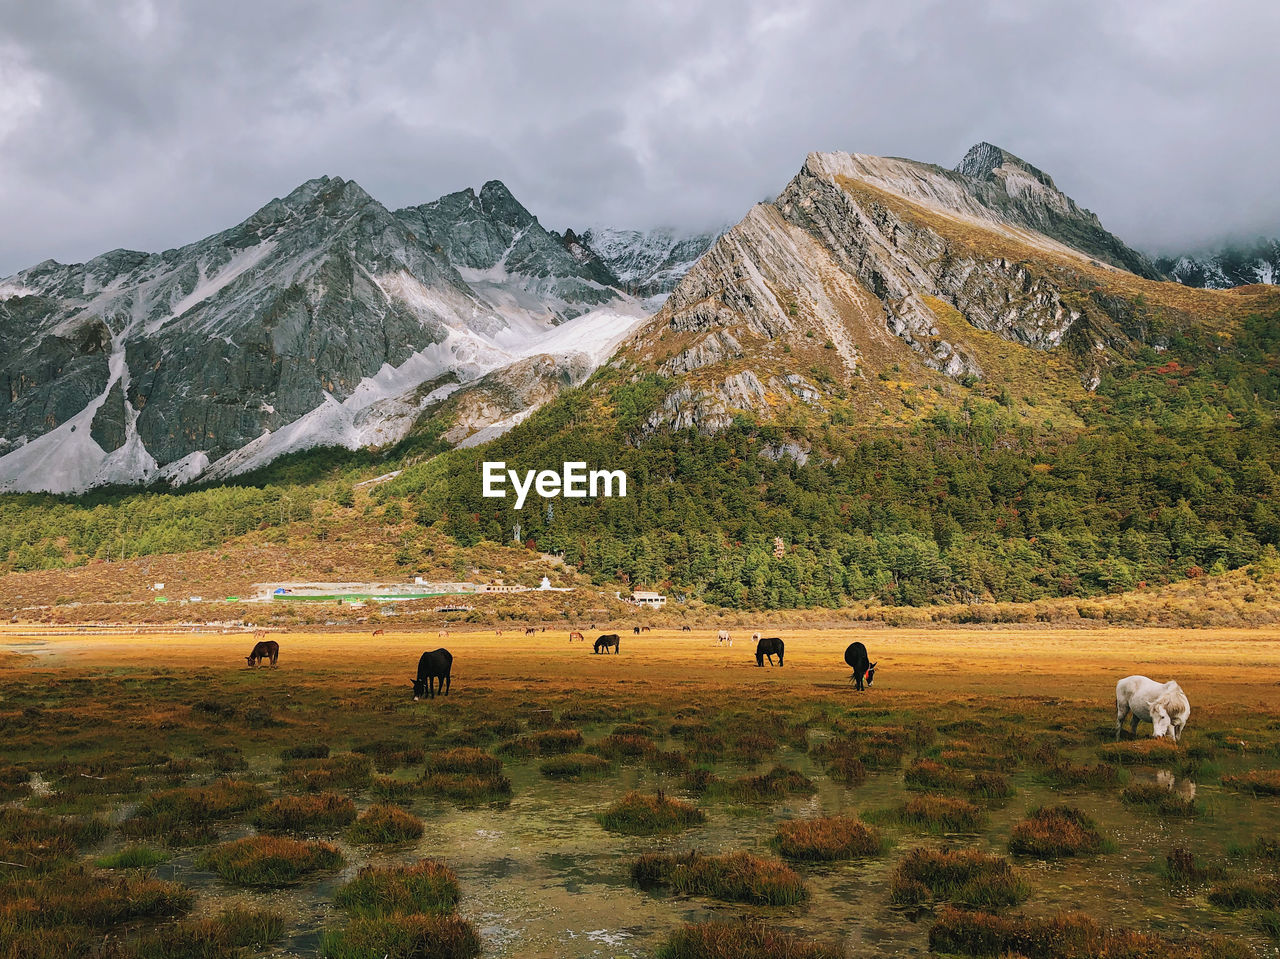 Scenic view of mountains with horses grazing on field against sky